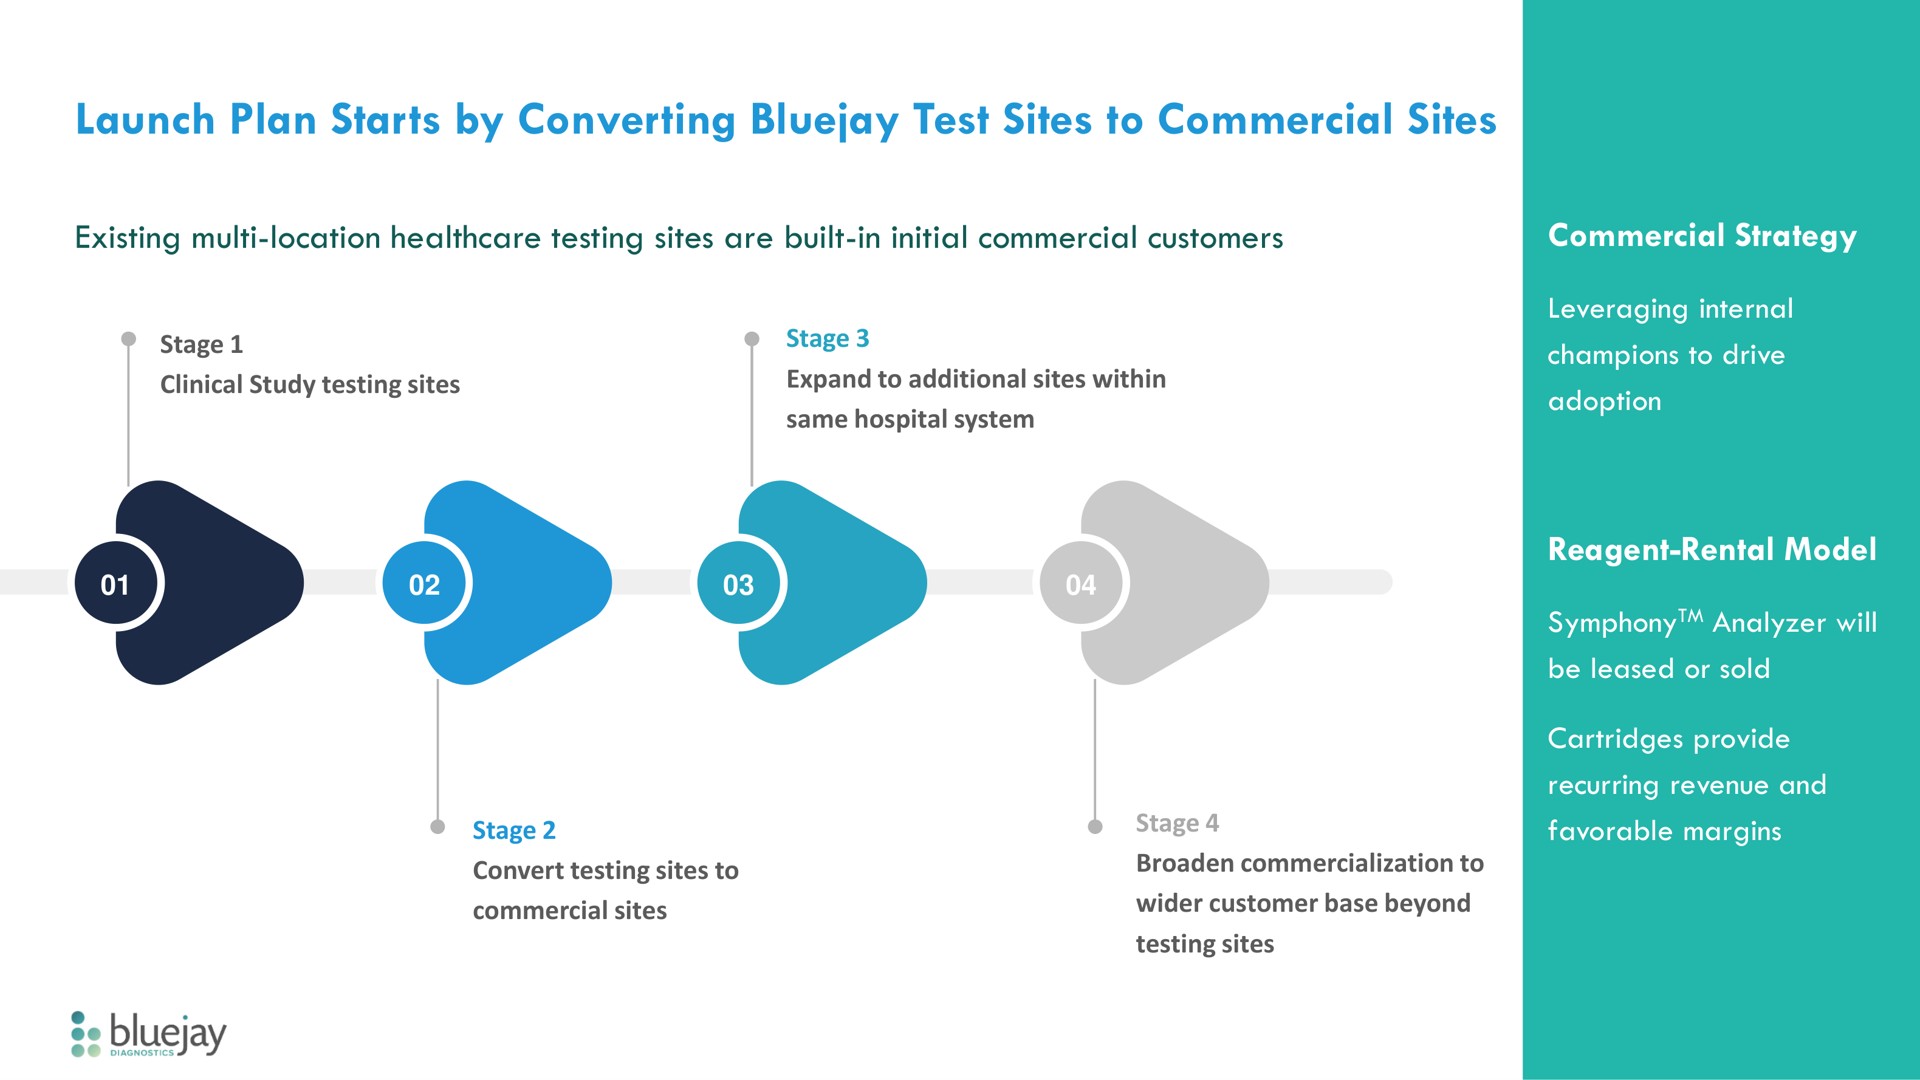 launch plan starts by converting test sites to commercial sites | Bluejay